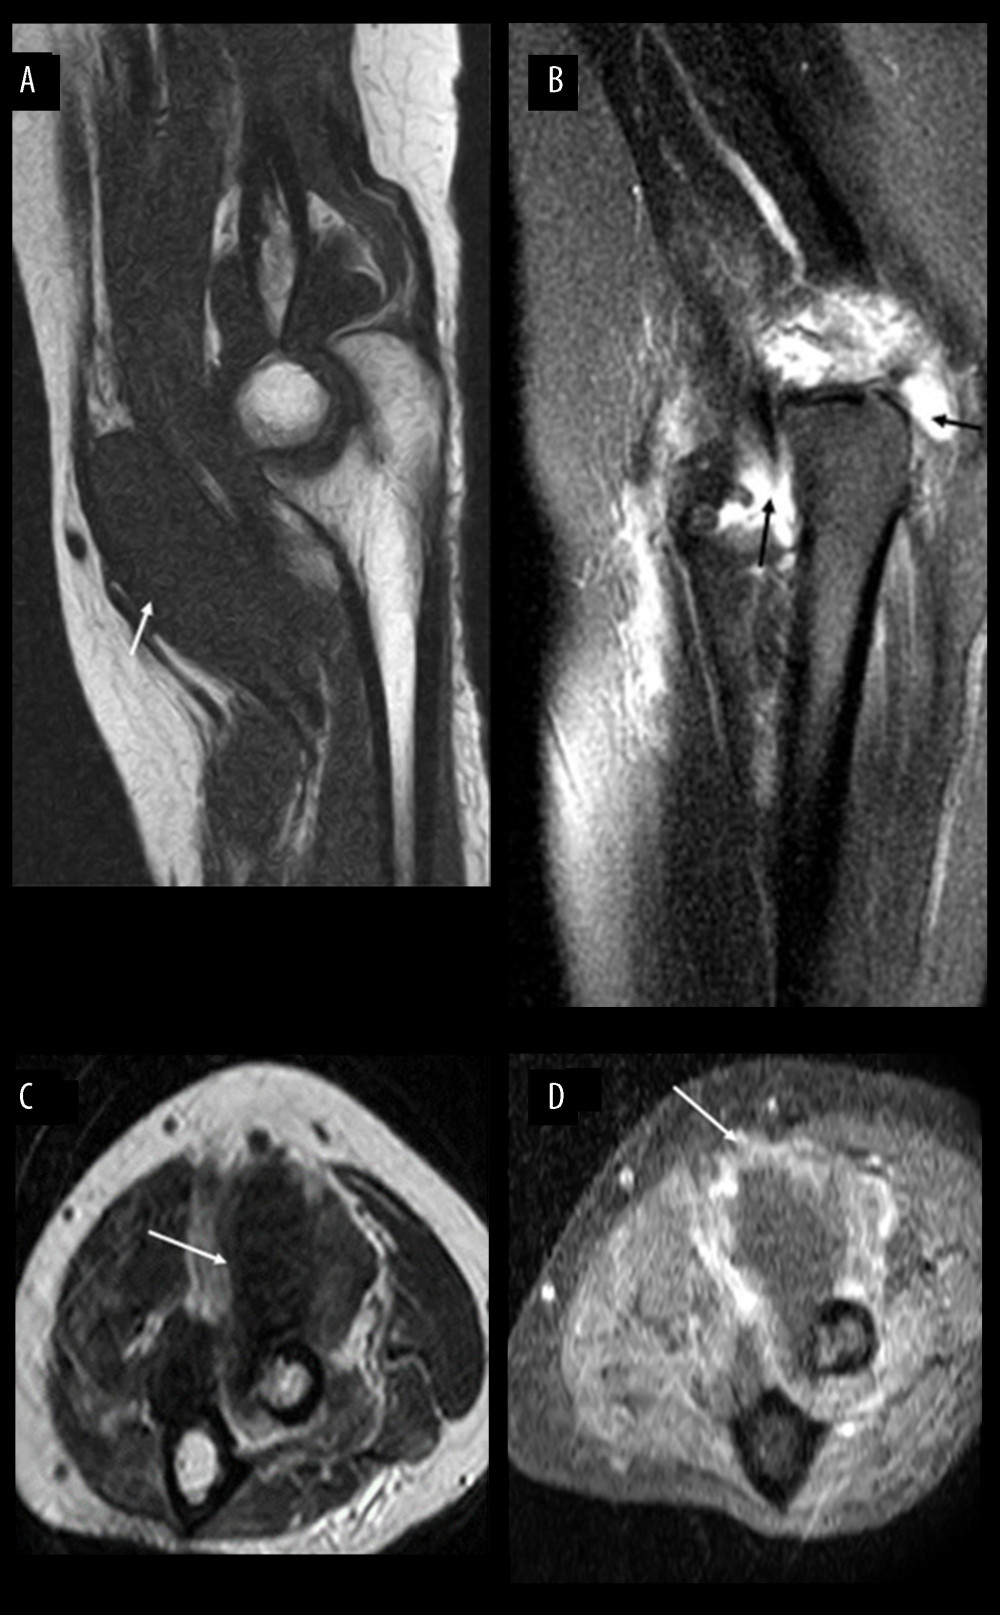 Magnetic resonance imaging of the elbow. (A, B) Sagittal section (left to right T1-weighted [T1W], T2-weighted fat-suppressed [T2FS]). (C) Axial T1-weighted, (D) post-gadolinium contrast imaging. A slight effusion was present in the anterior and posterior recessus joint, with an hyperintense signal on T2W sequence (black arrow). There is extensive effusion of the bicipitoradial bursa, with synovial thickening that is low signal intensity on T1W and T2FS sequences and mild peripheral enhancement after contrast (D) (white arrow), consistent with bicipitoradial bursitis.